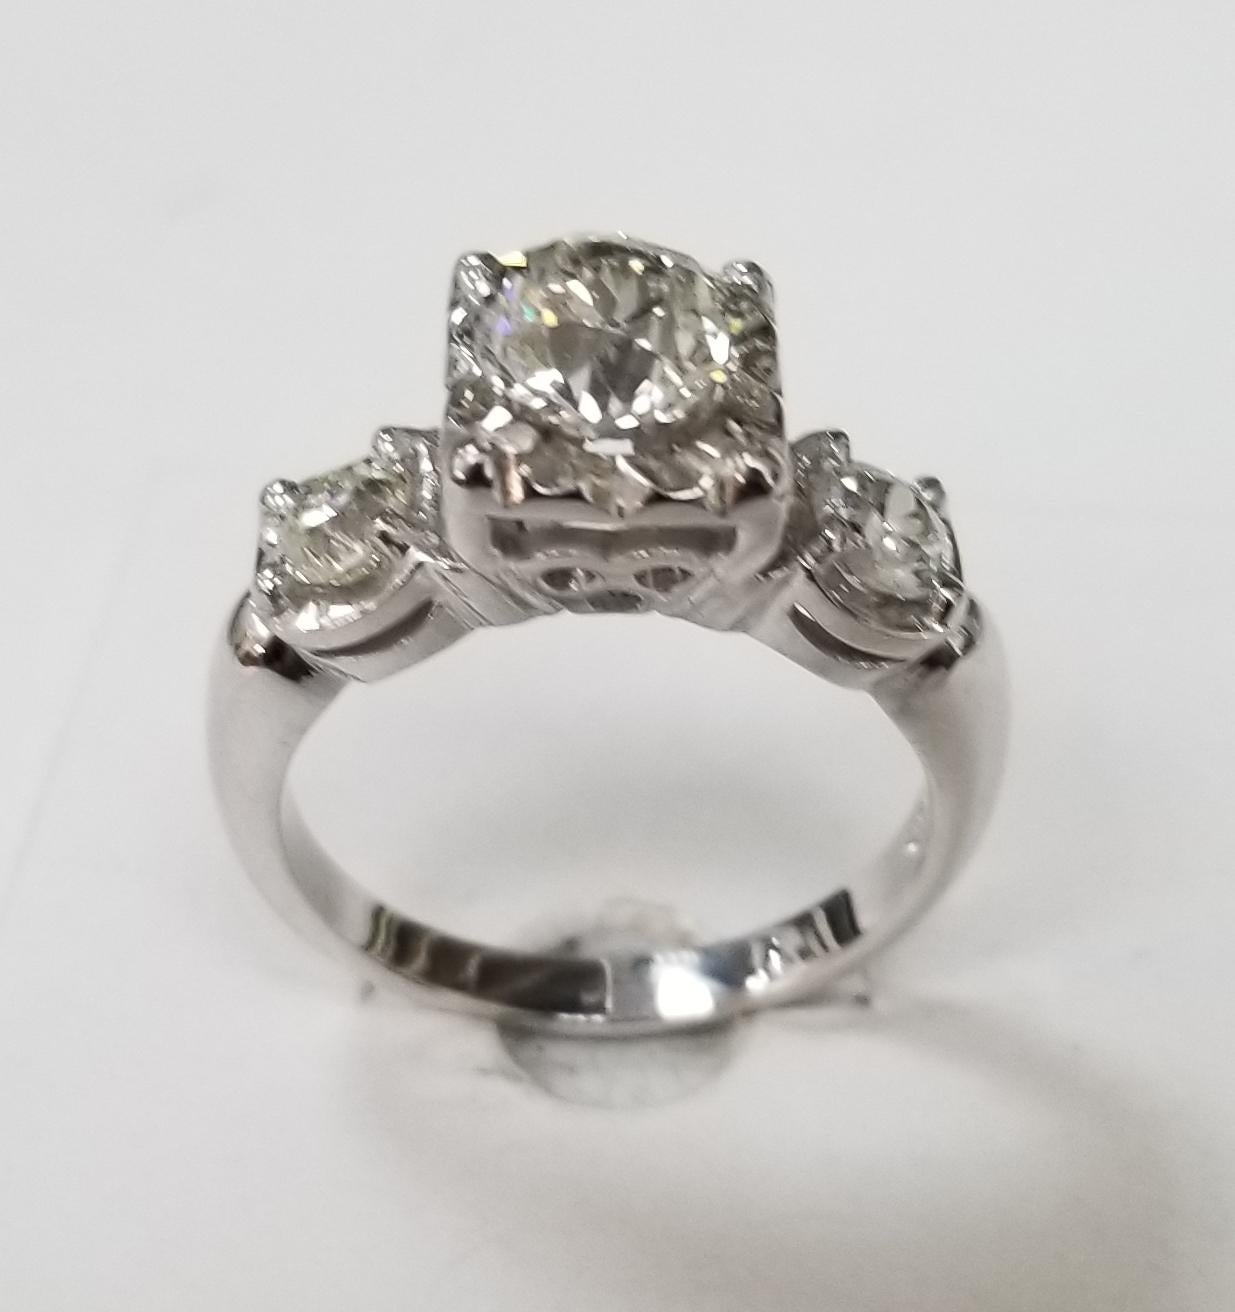 Vintage Old Euro Cut 3 stone ring EGL G SI3 total weight 1.67cts., containing 1 euro cut diamond; color EGL Certificate color 